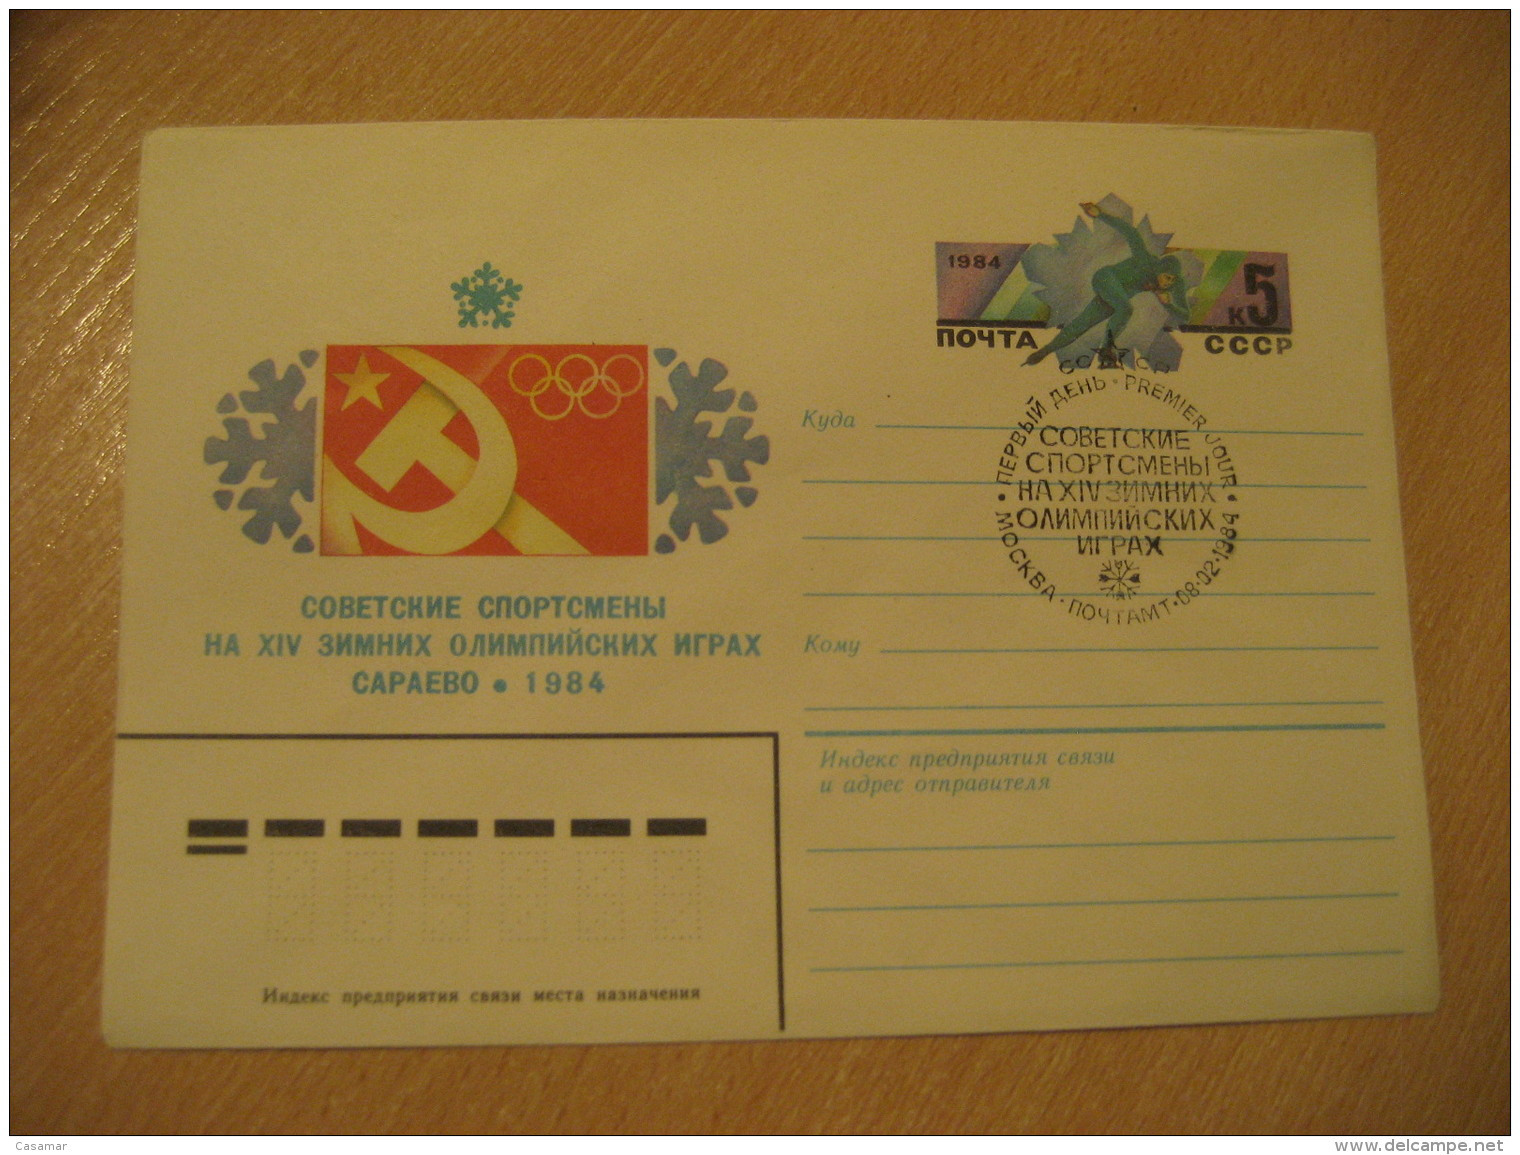 RUSSIA 1984 Olympic Games Olympics Speed Skating On Ice Patinage De Vitesse Sur Glace Postal Stationery Cover USSR CCCP - Figure Skating